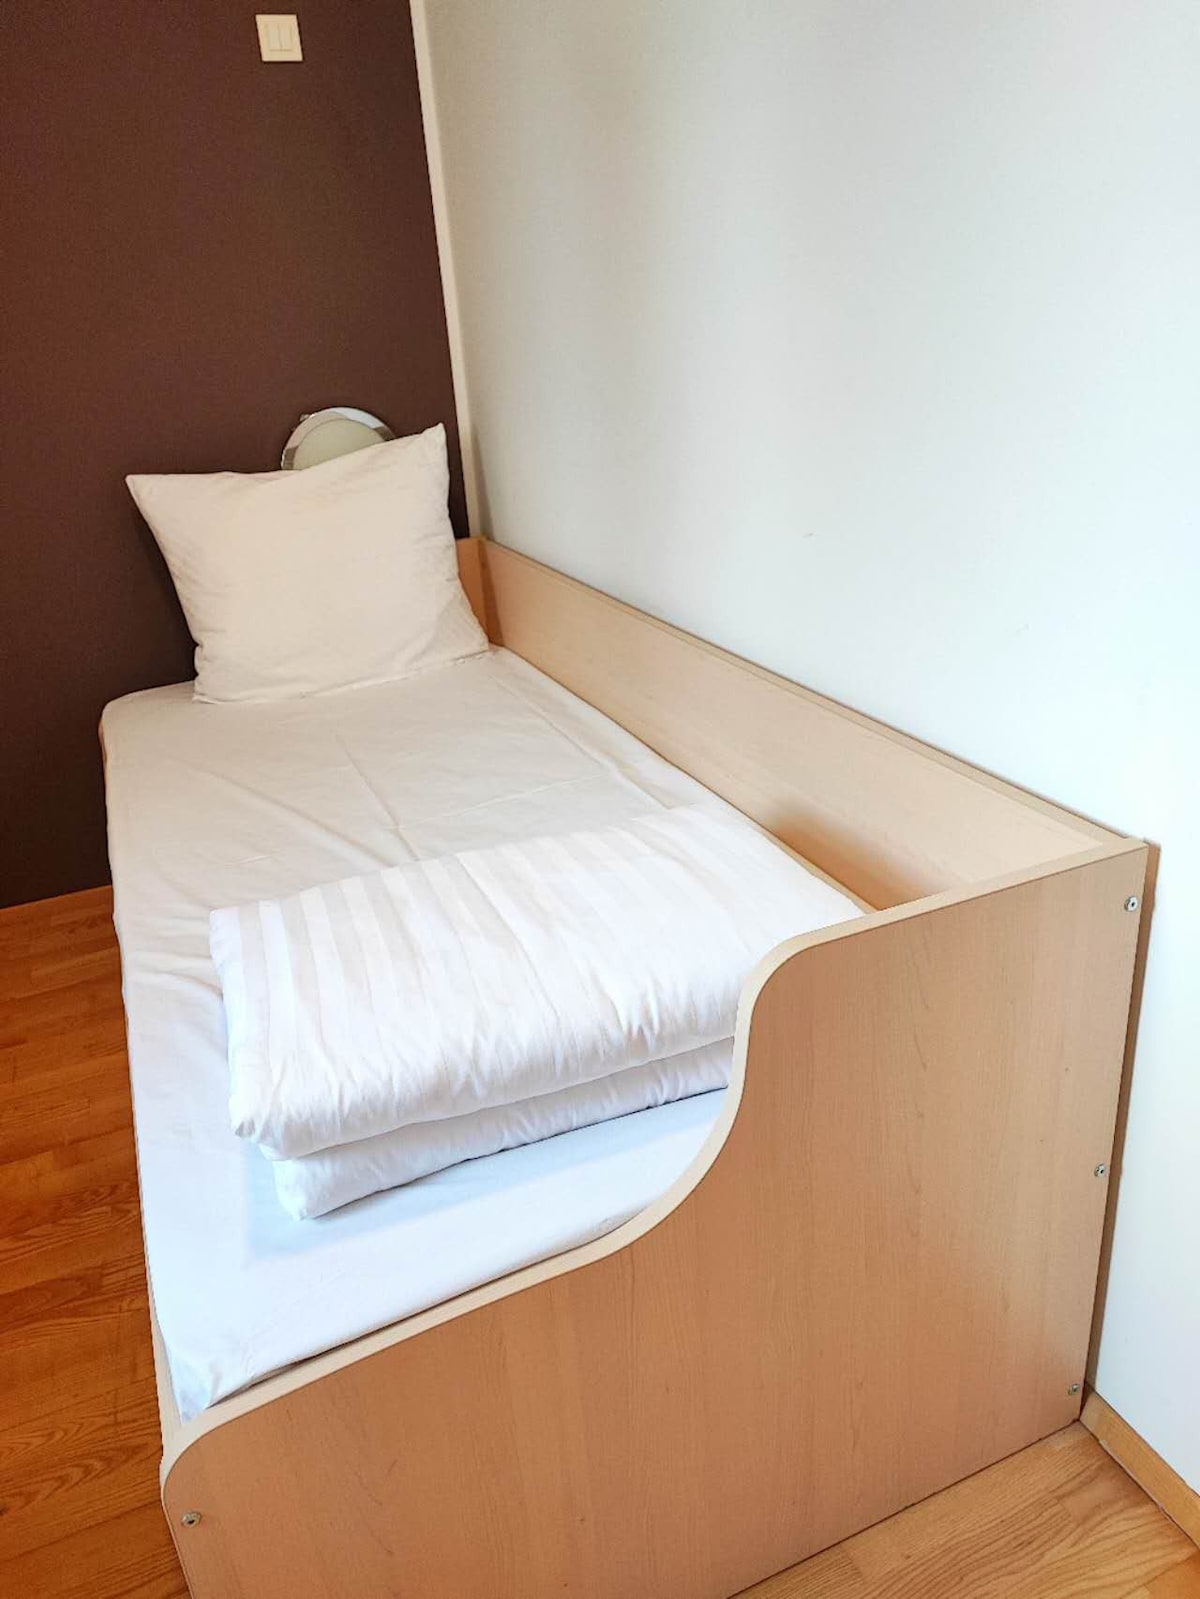 Room with single bed